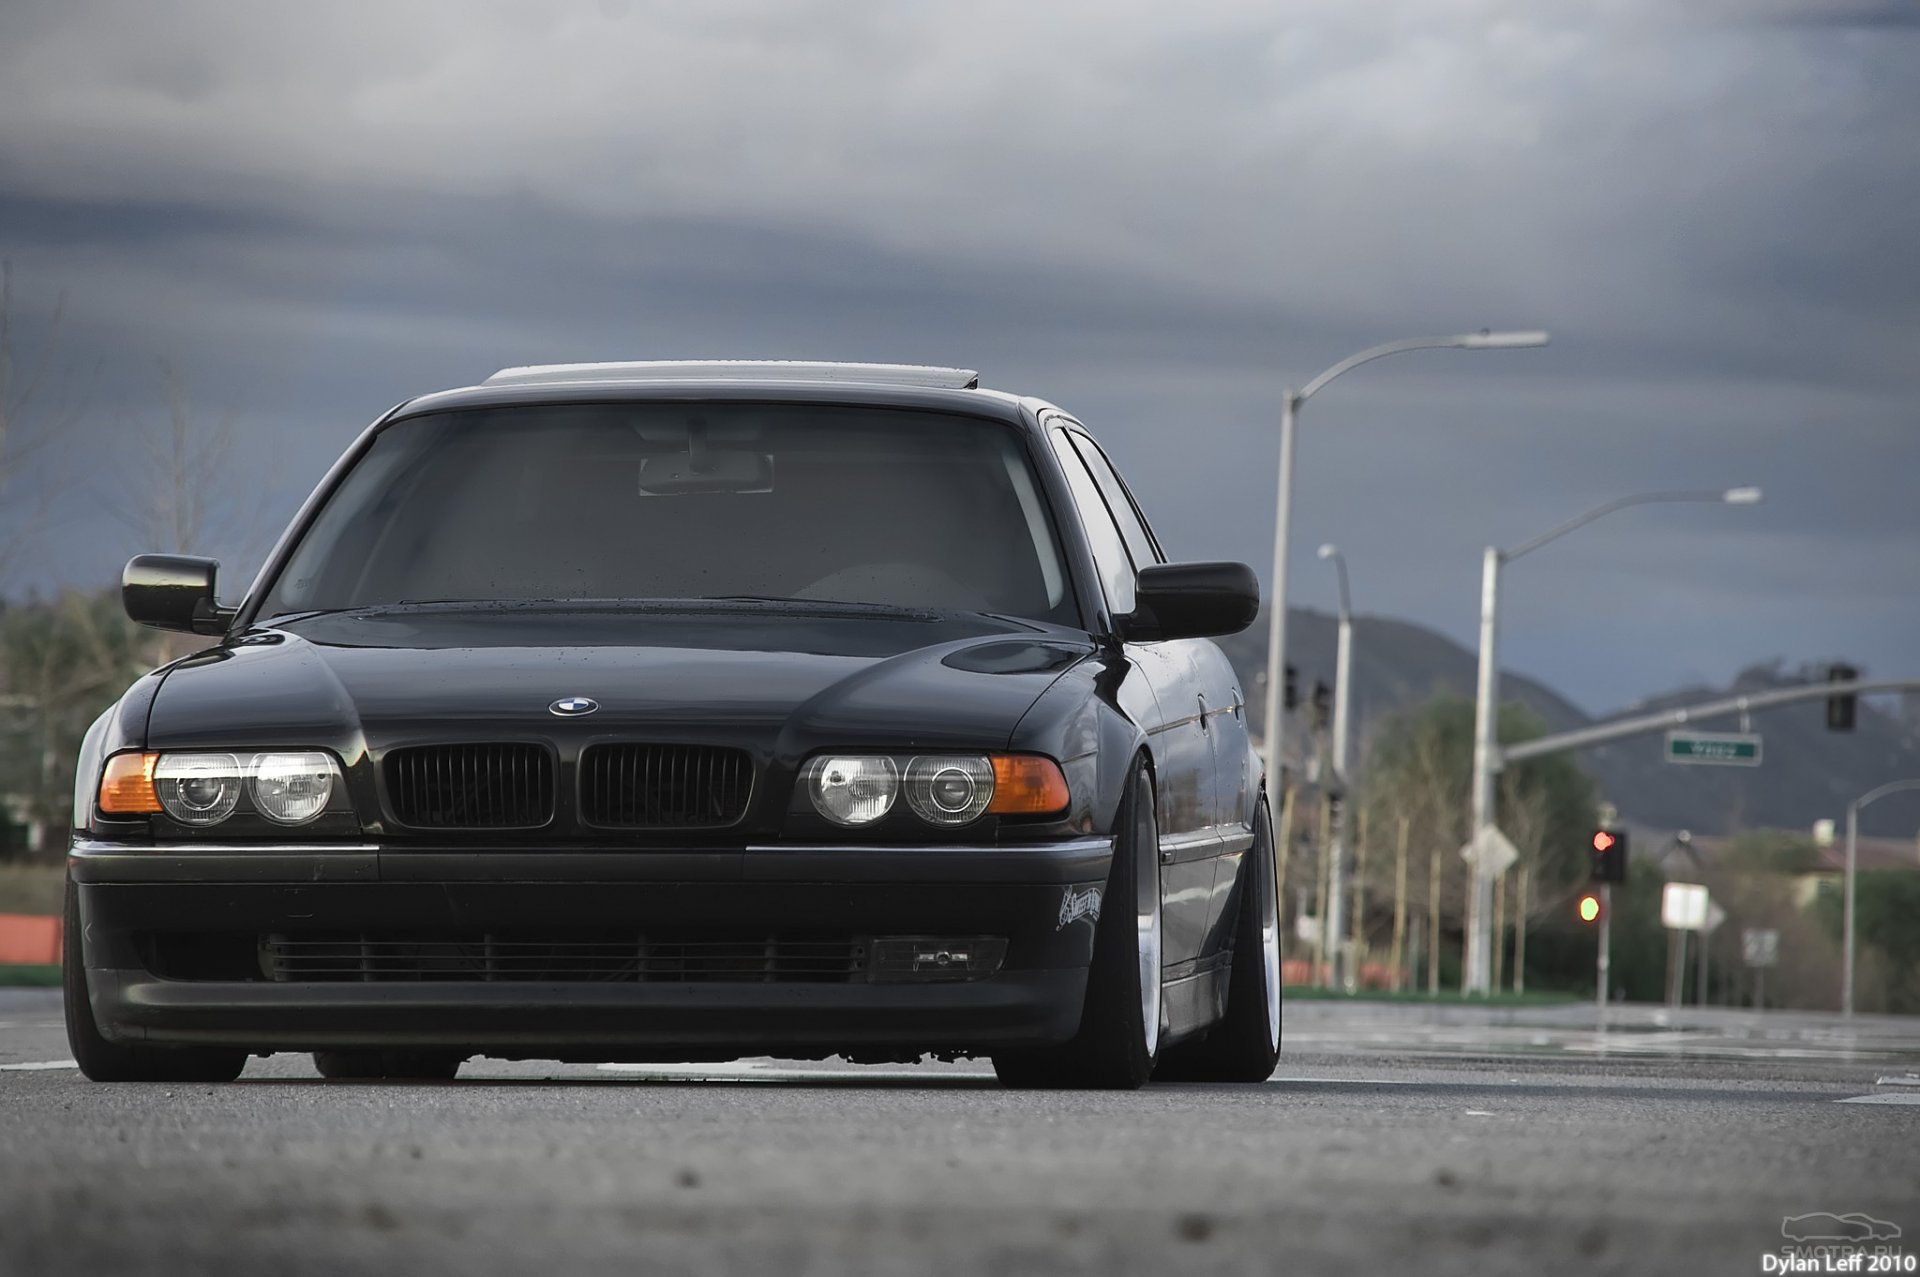 Bmw E38 Dylan Leff Boomer Bumer Seven Drives Tuning